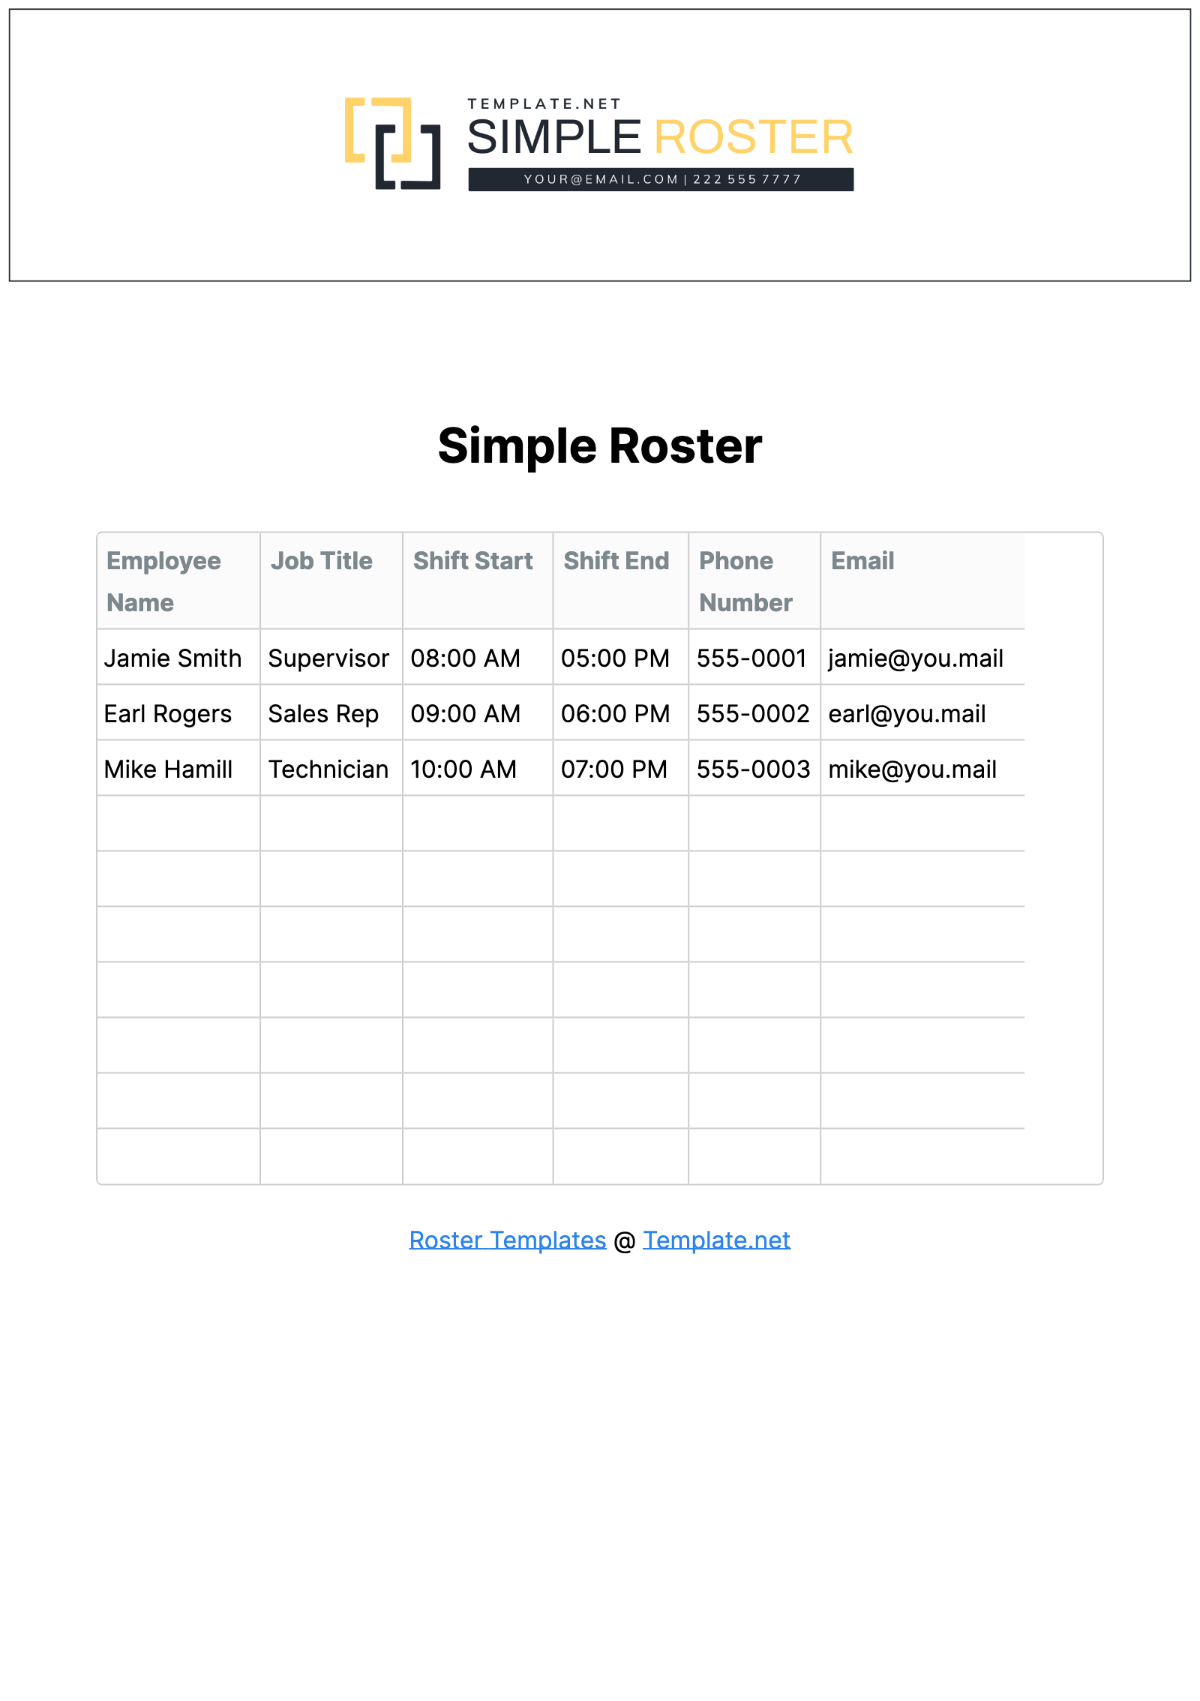 Simple Roster Template